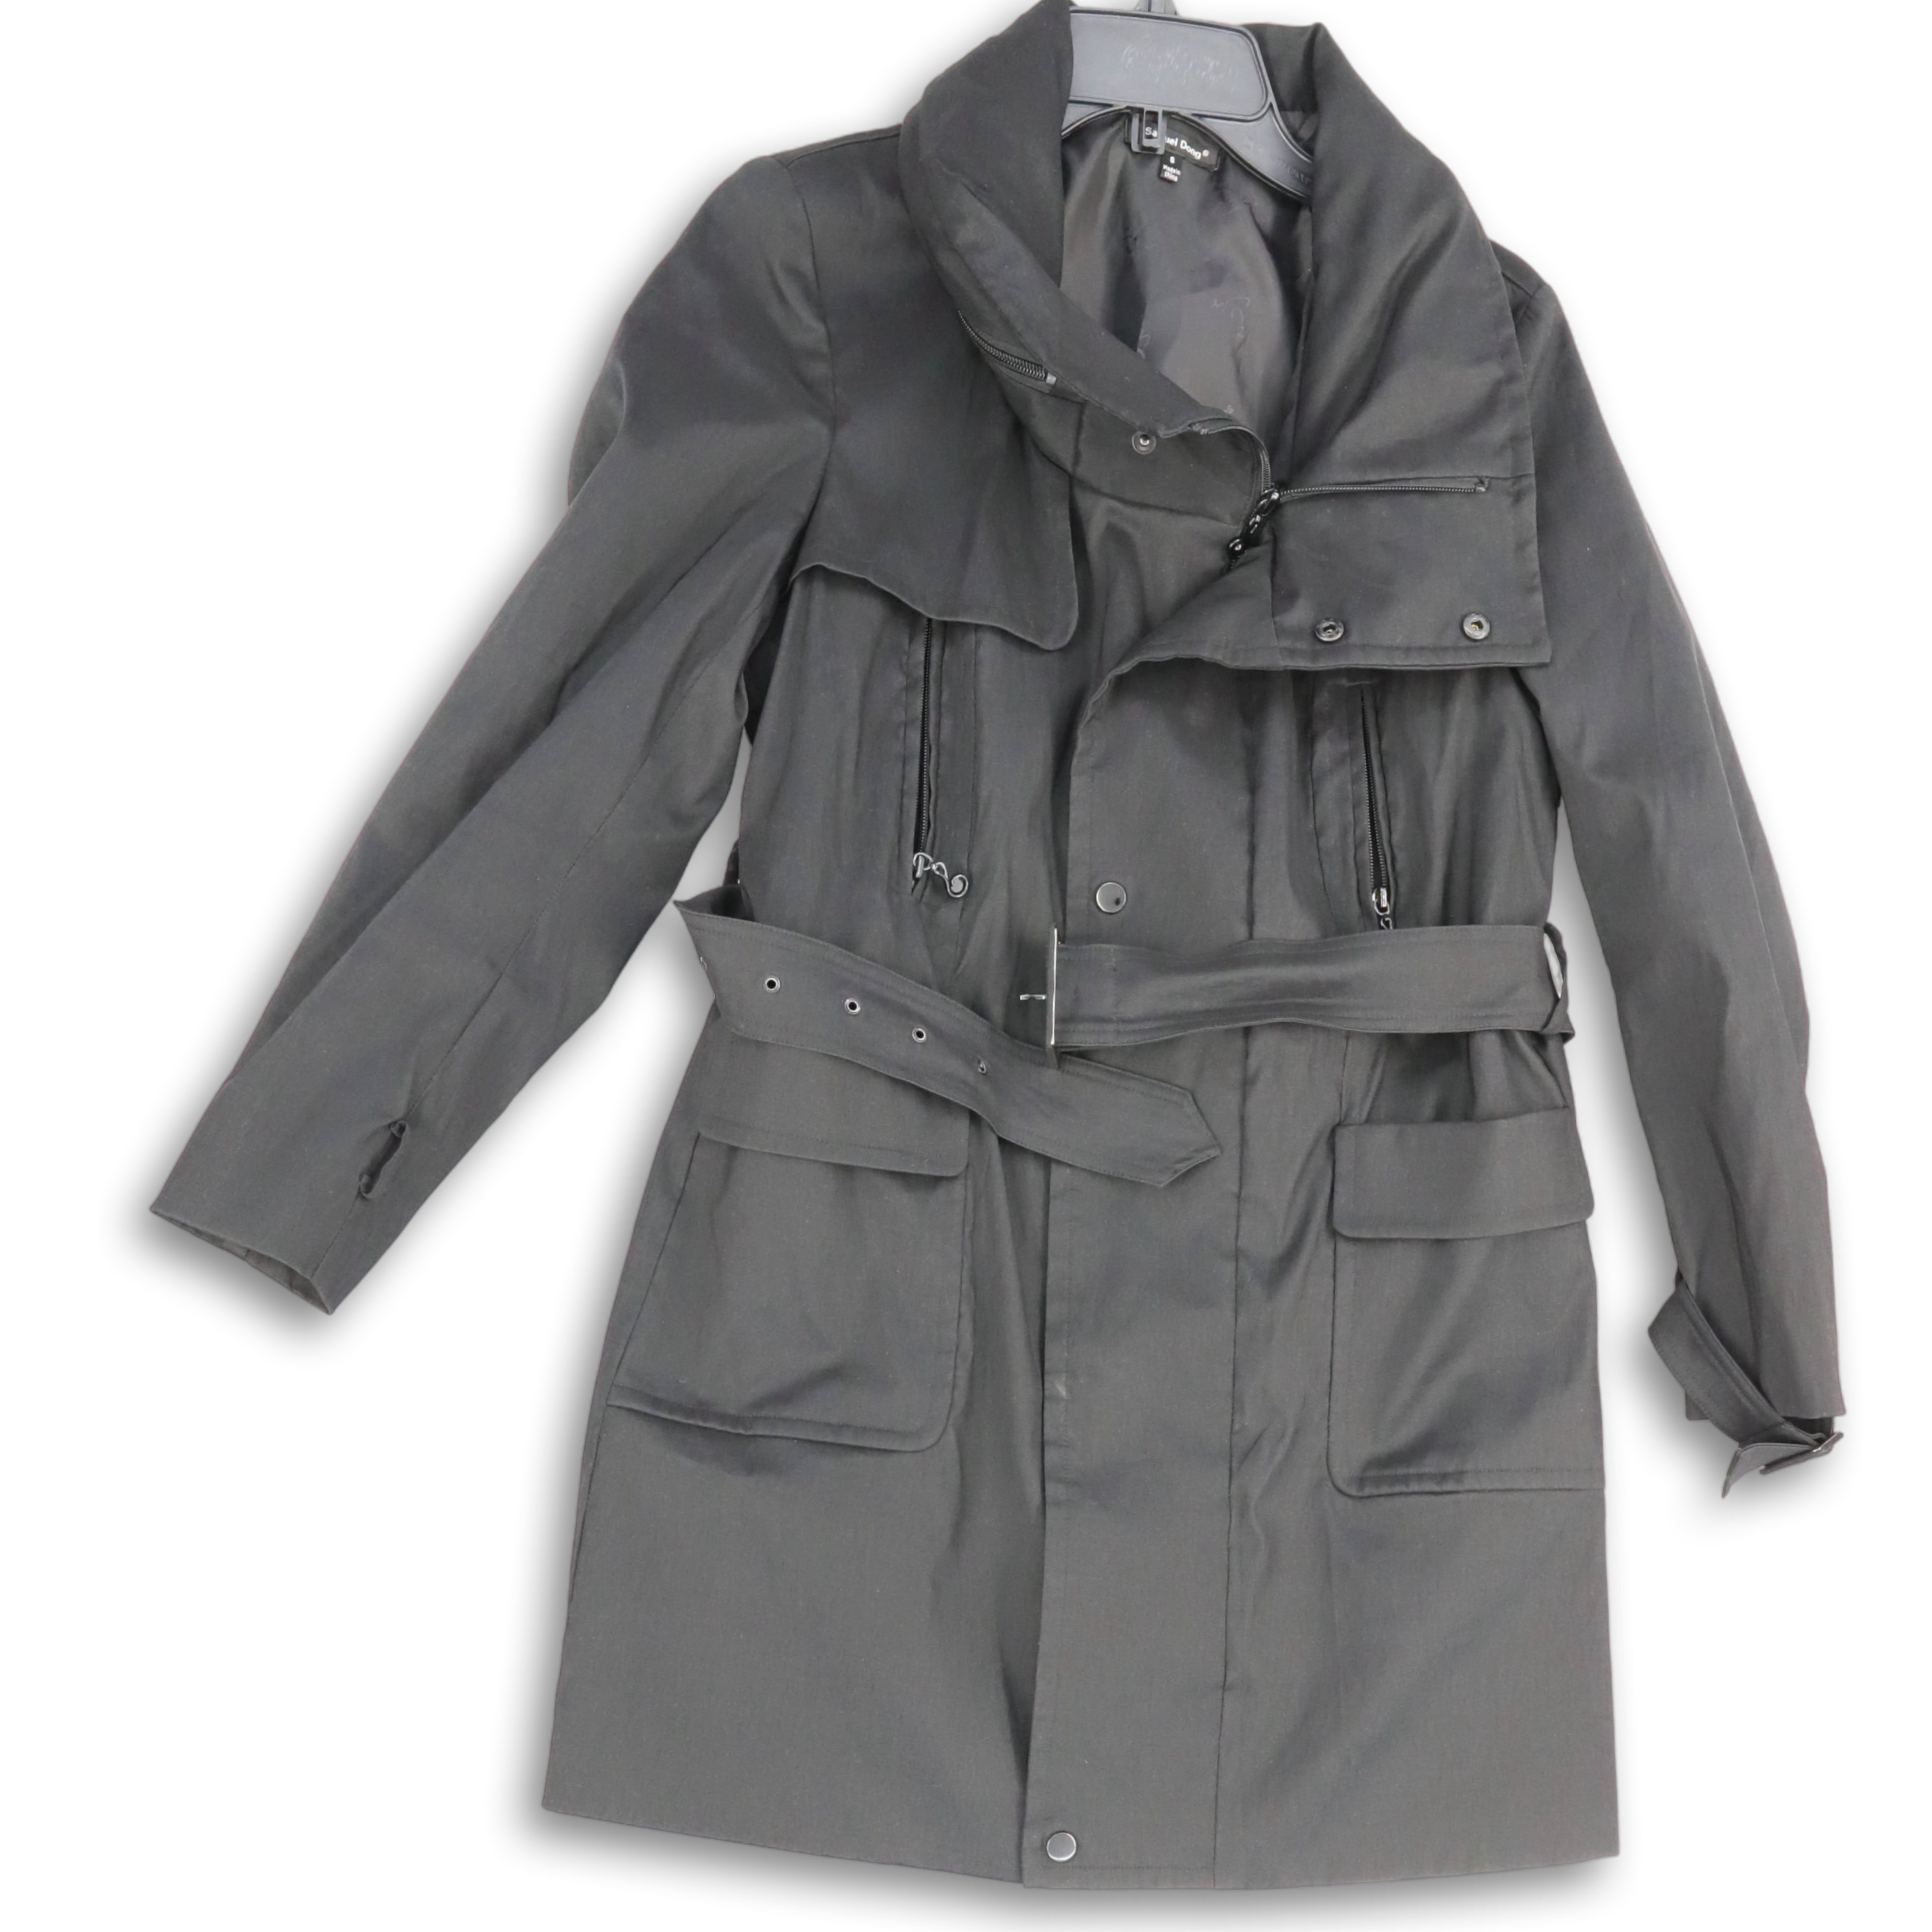 Kate spade belted raincoat trench water resistant Oxford coat 